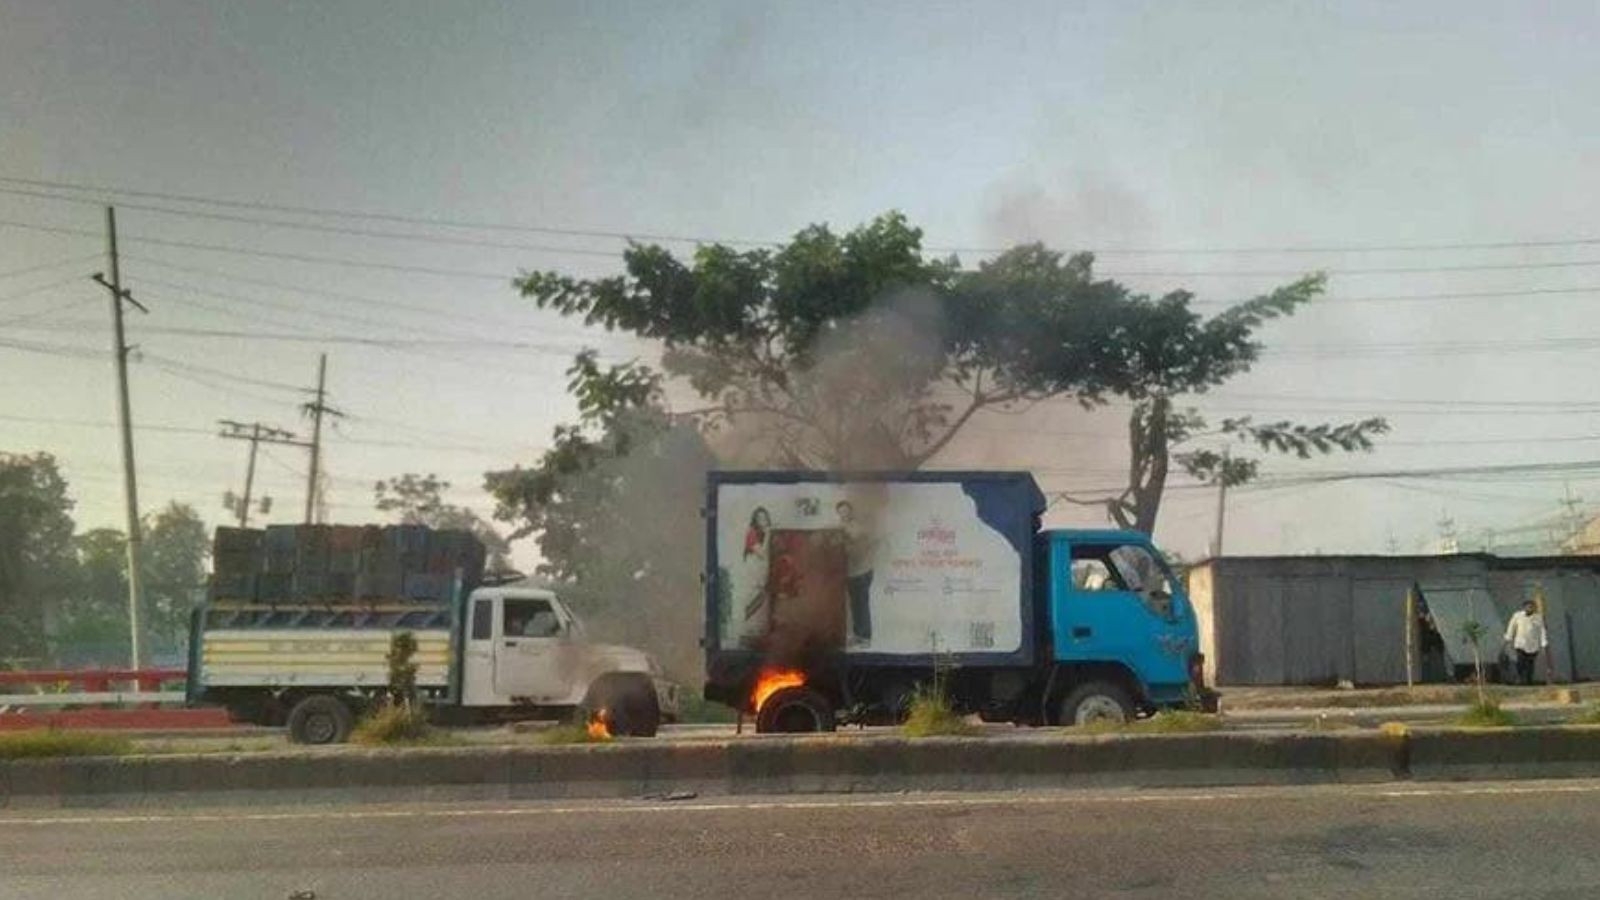 Vehicles torched as first day blockade underway